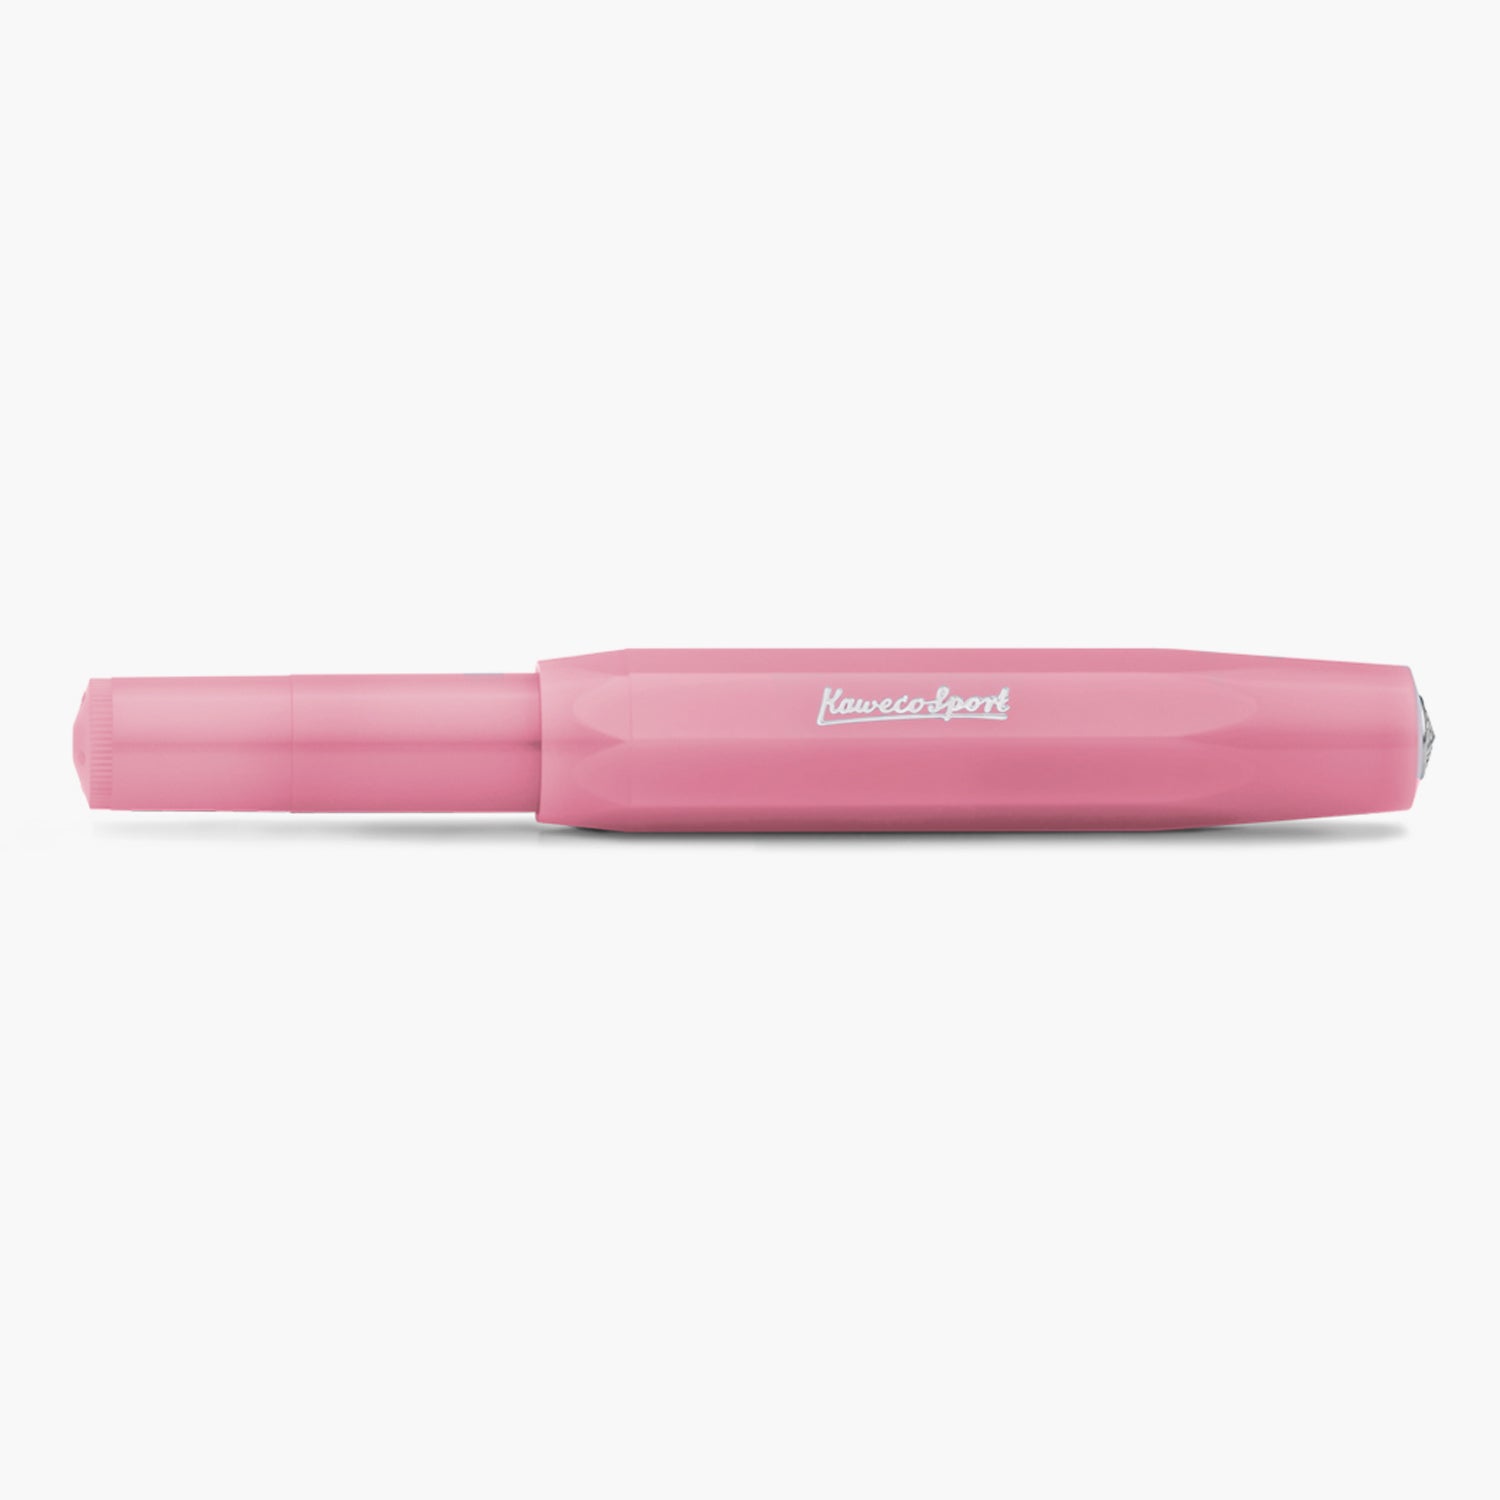 Frosted Sport Gel Rollerball Pen - Blush Pink